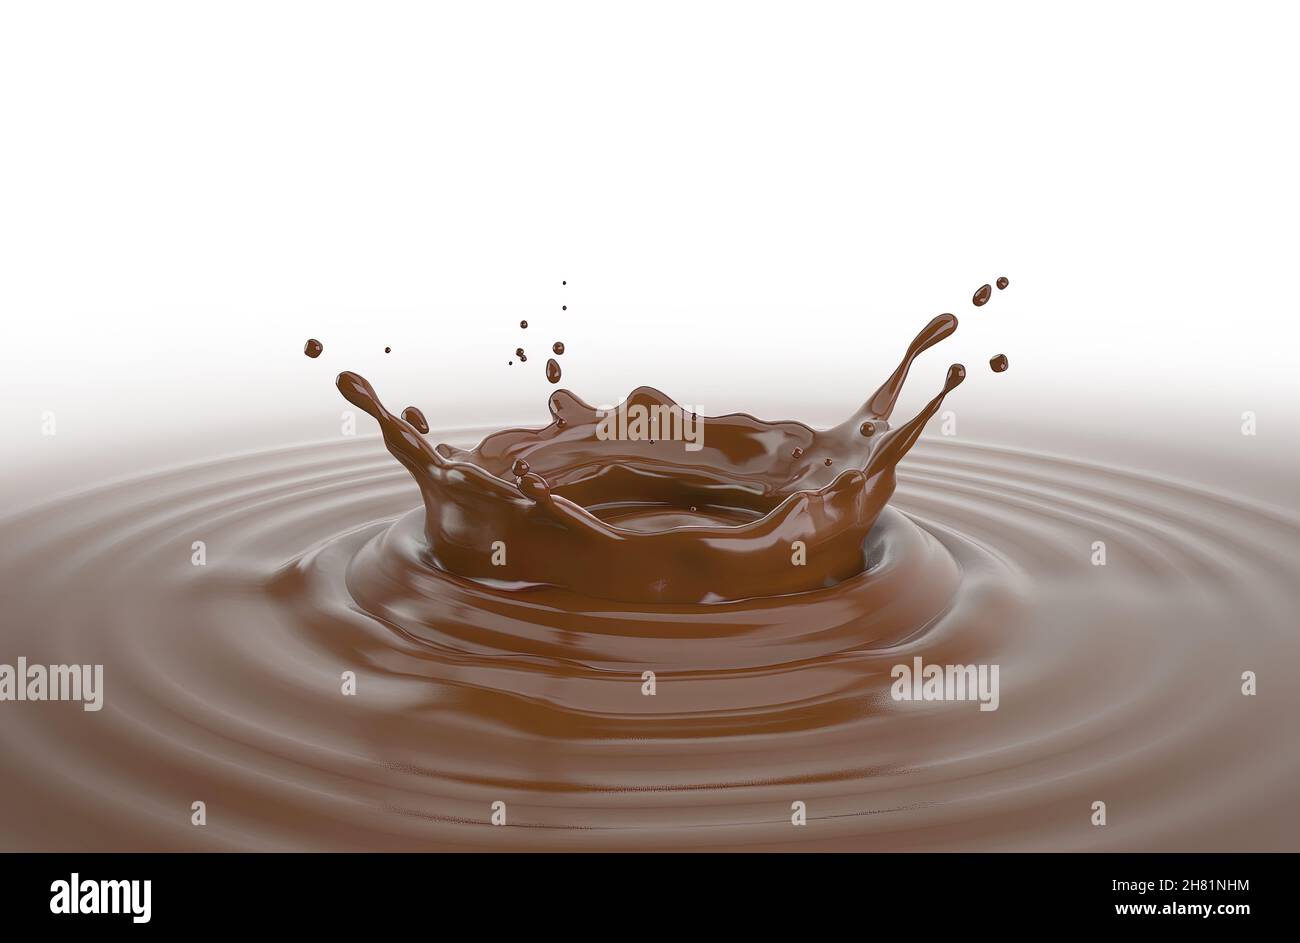 Liquid Chocolate crown splash pool with ripples. Isolated On white background. Stock Photo